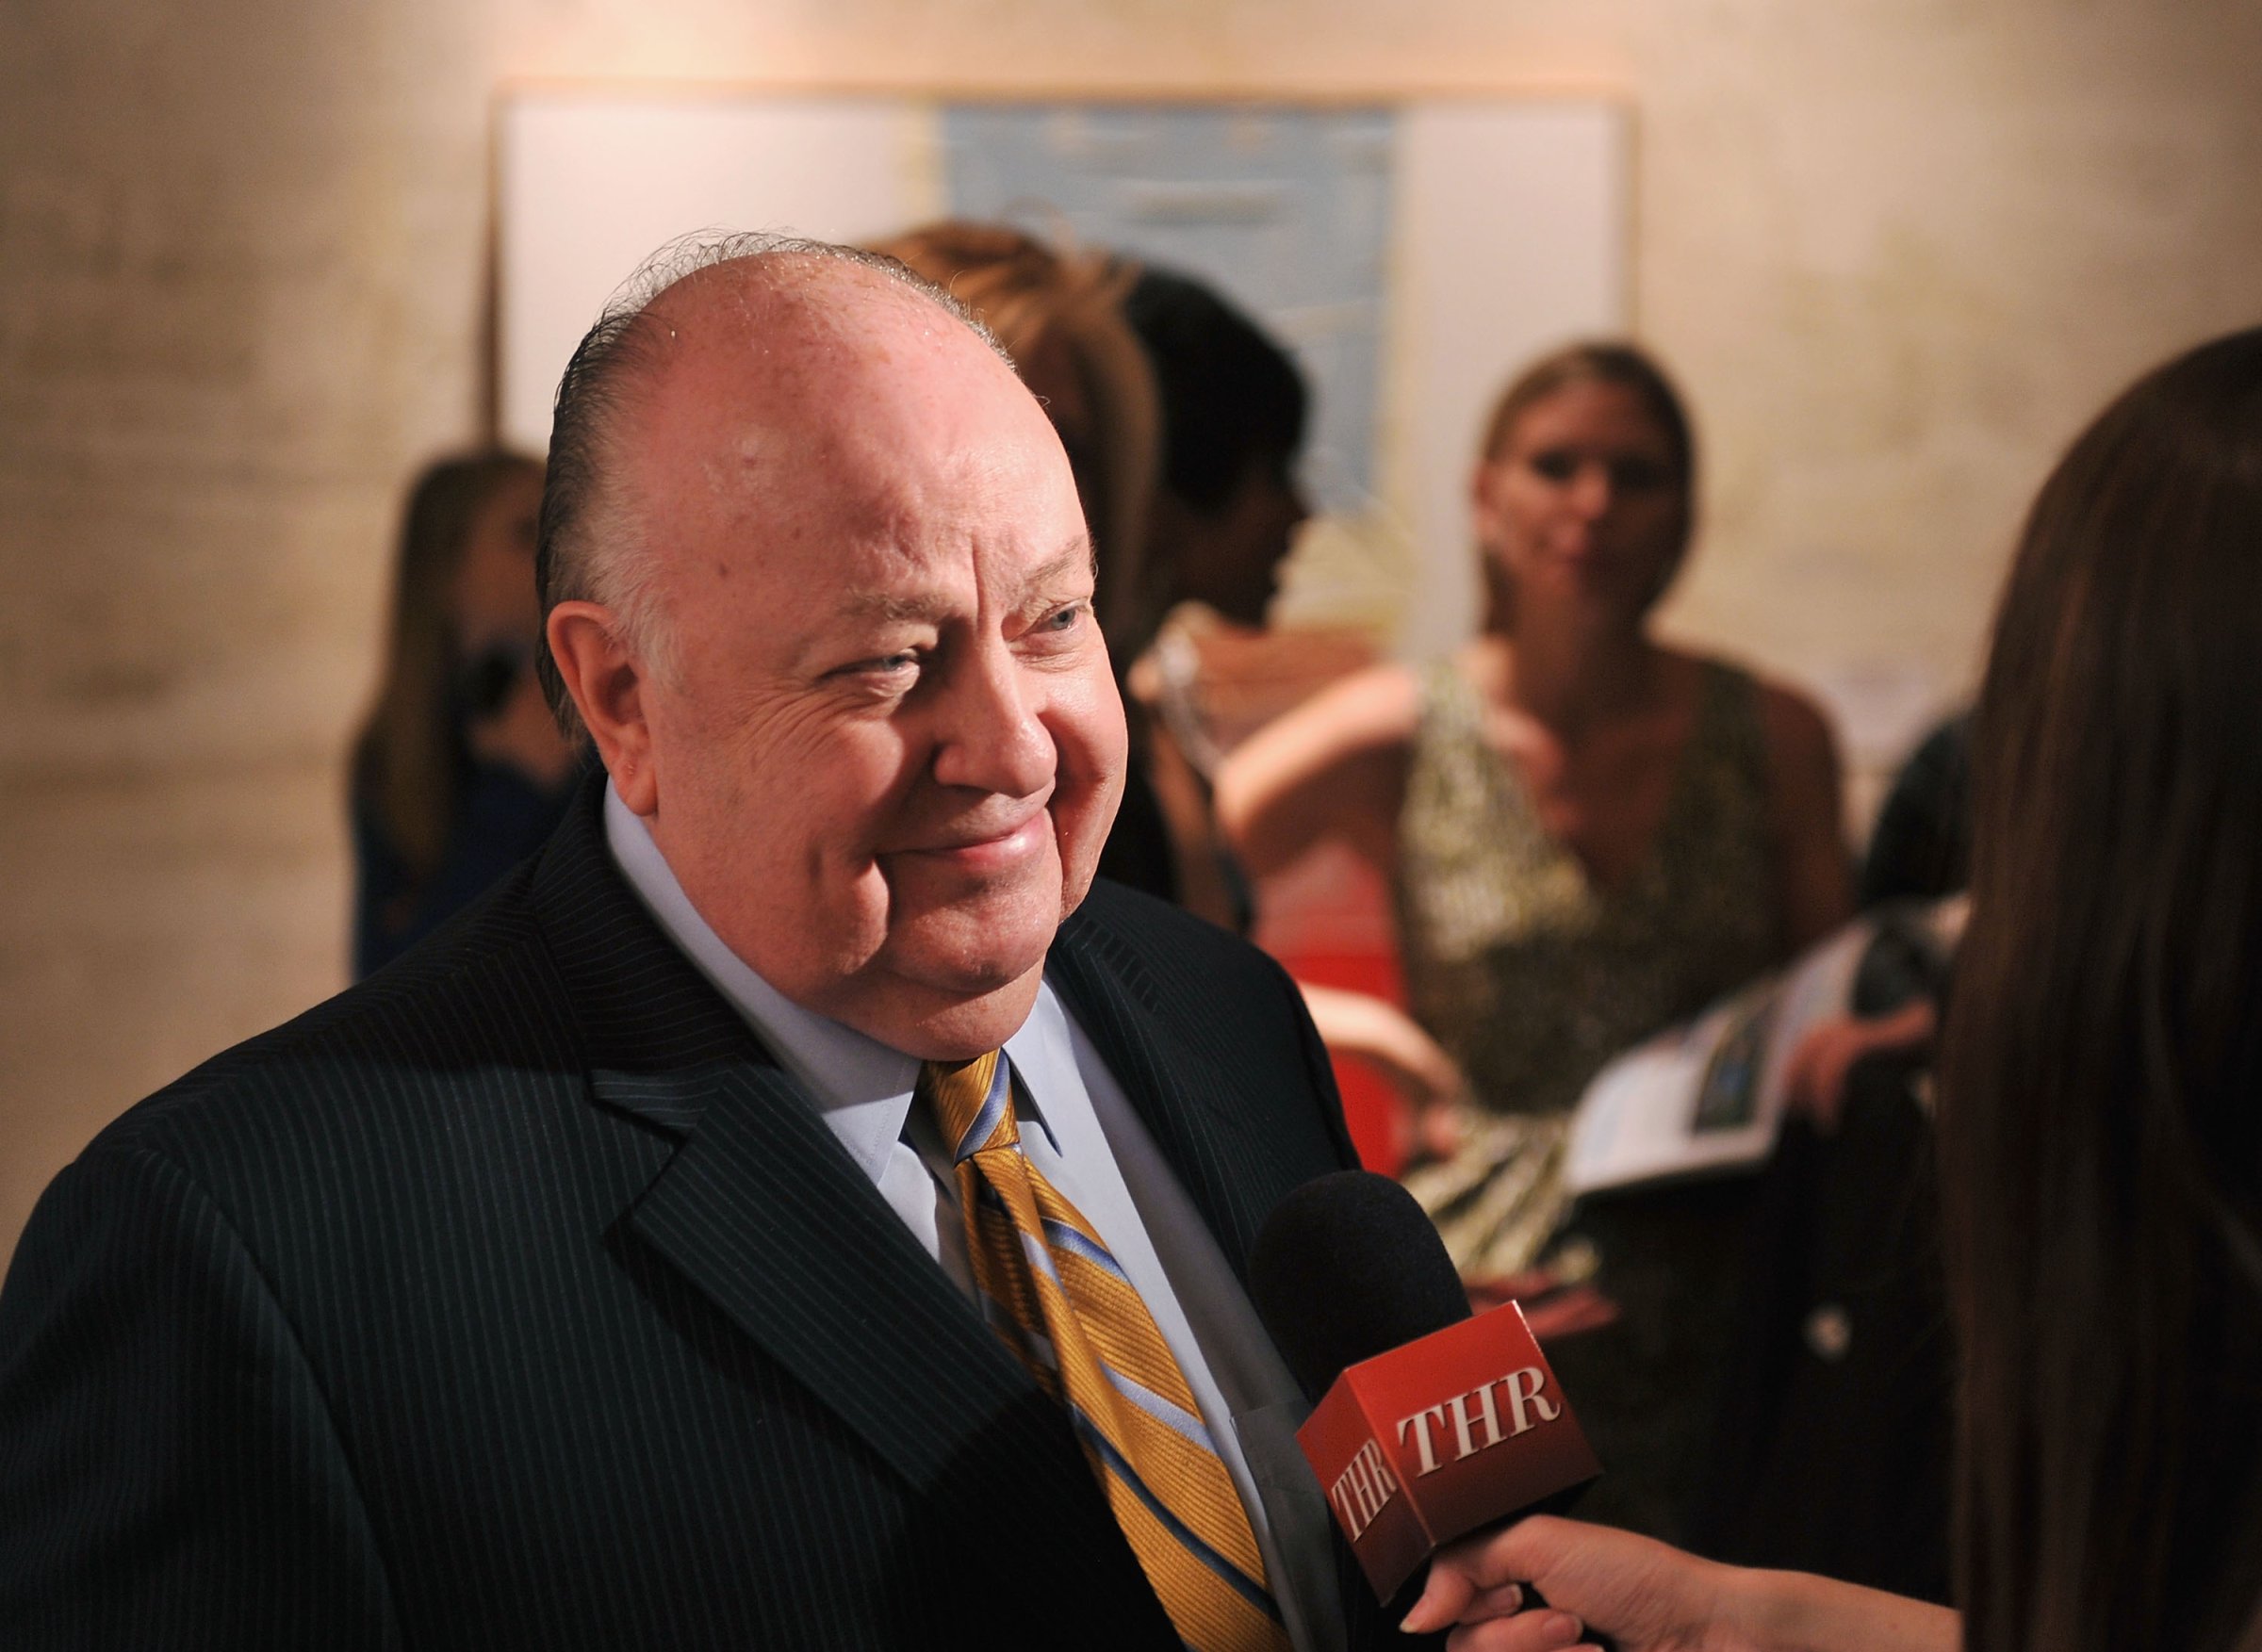 Roger Ailes, President of Fox News Channel attends the Hollywood Reporter celebration of "The 35 Most Powerful People in Media" at the Four Season Grill Room on April 11, 2012 in New York City.